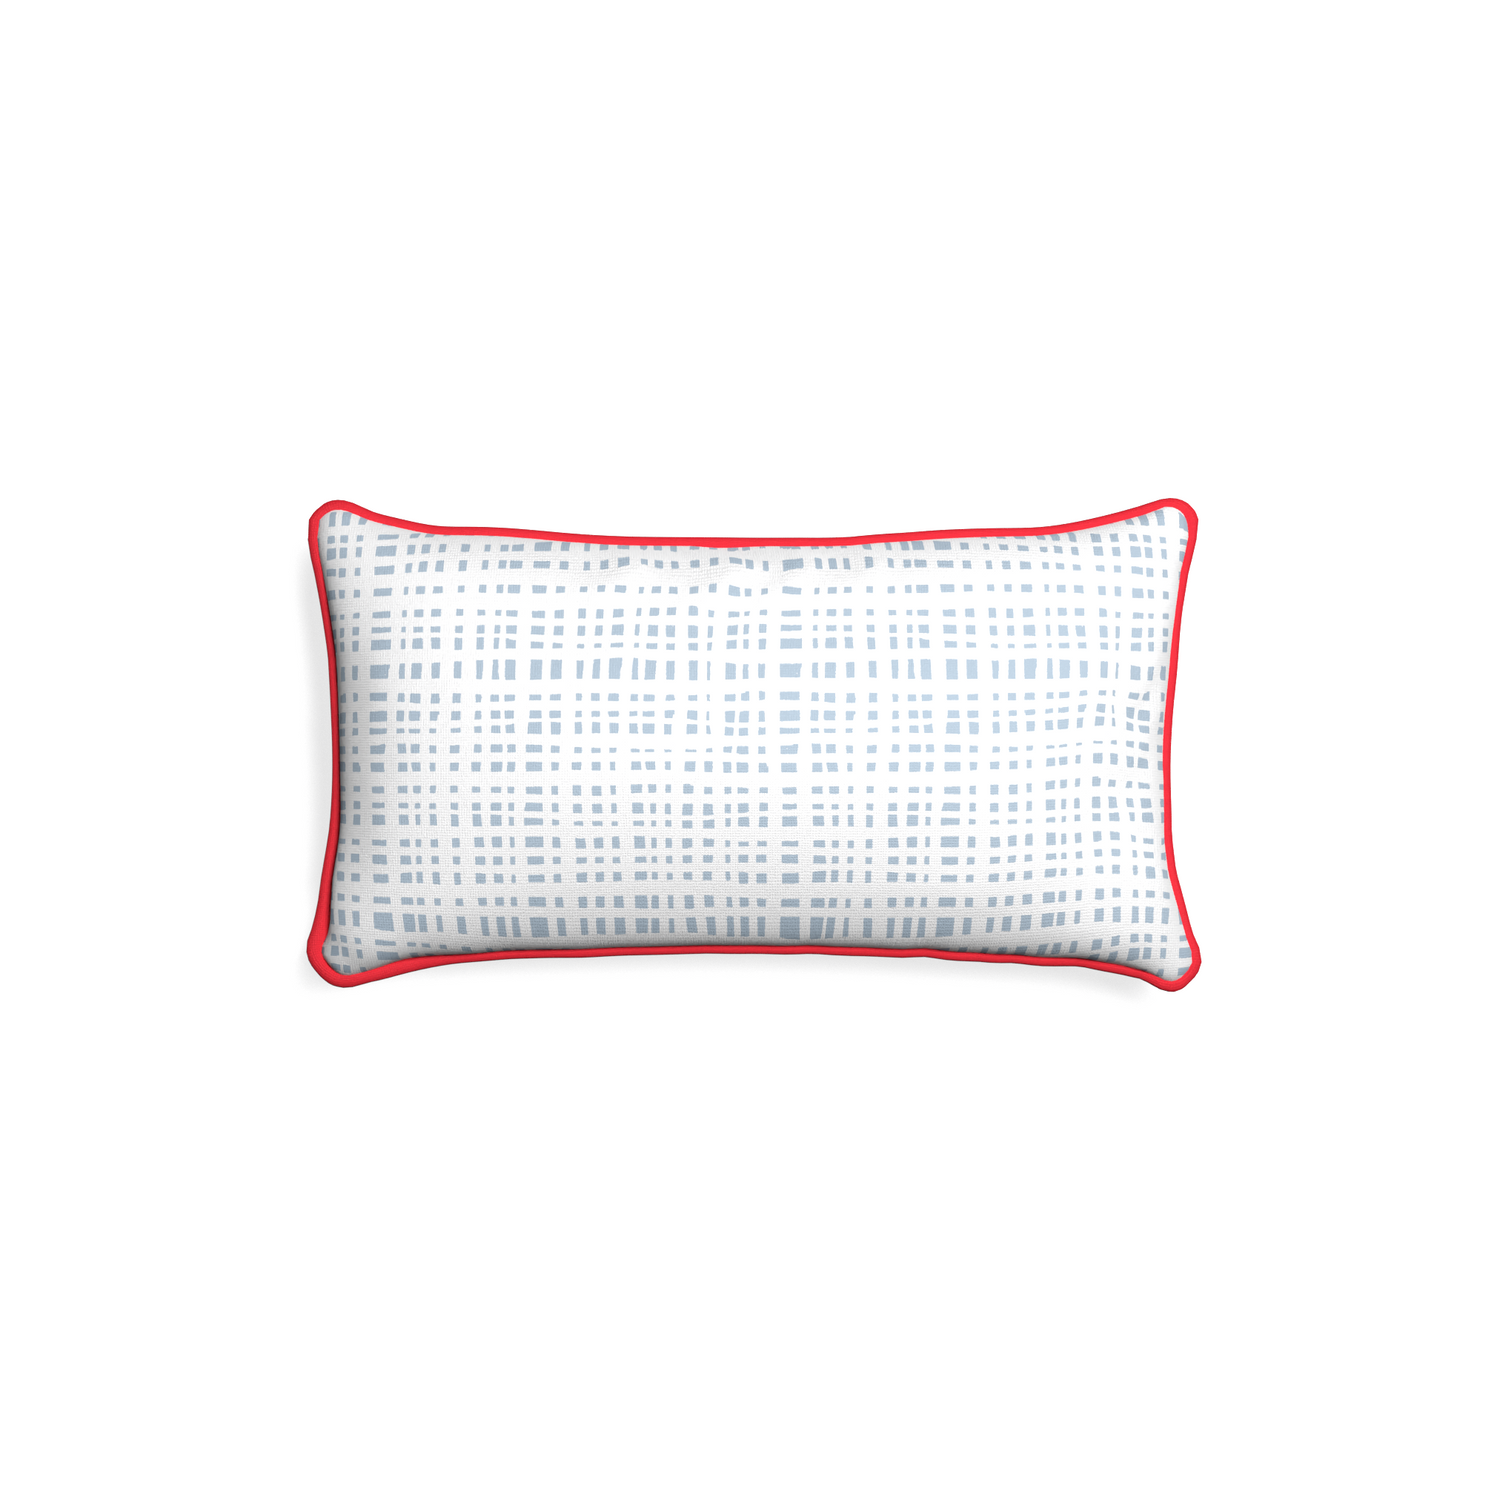 Petite-lumbar ginger sky custom plaid sky bluepillow with cherry piping on white background